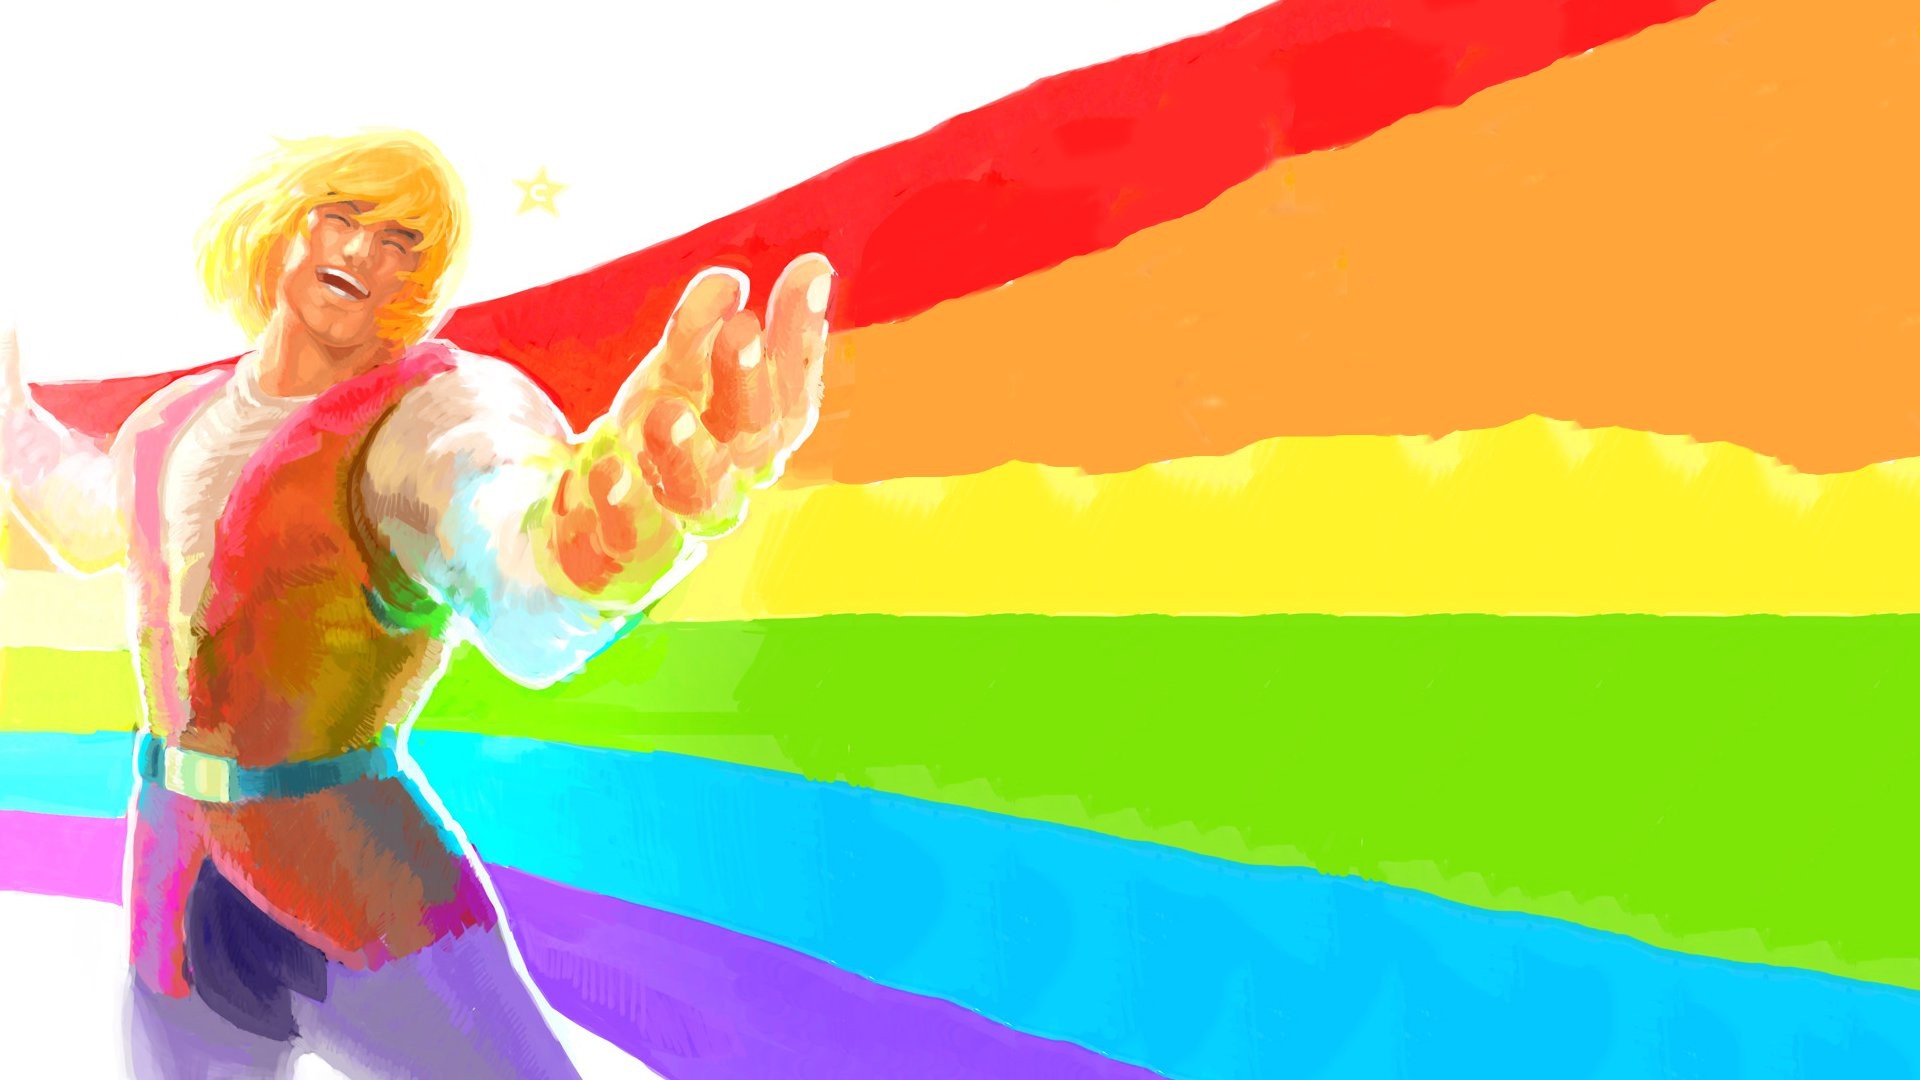 General 1920x1080 He-Man rainbows He-Man and the Masters of the Universe TV series fan art